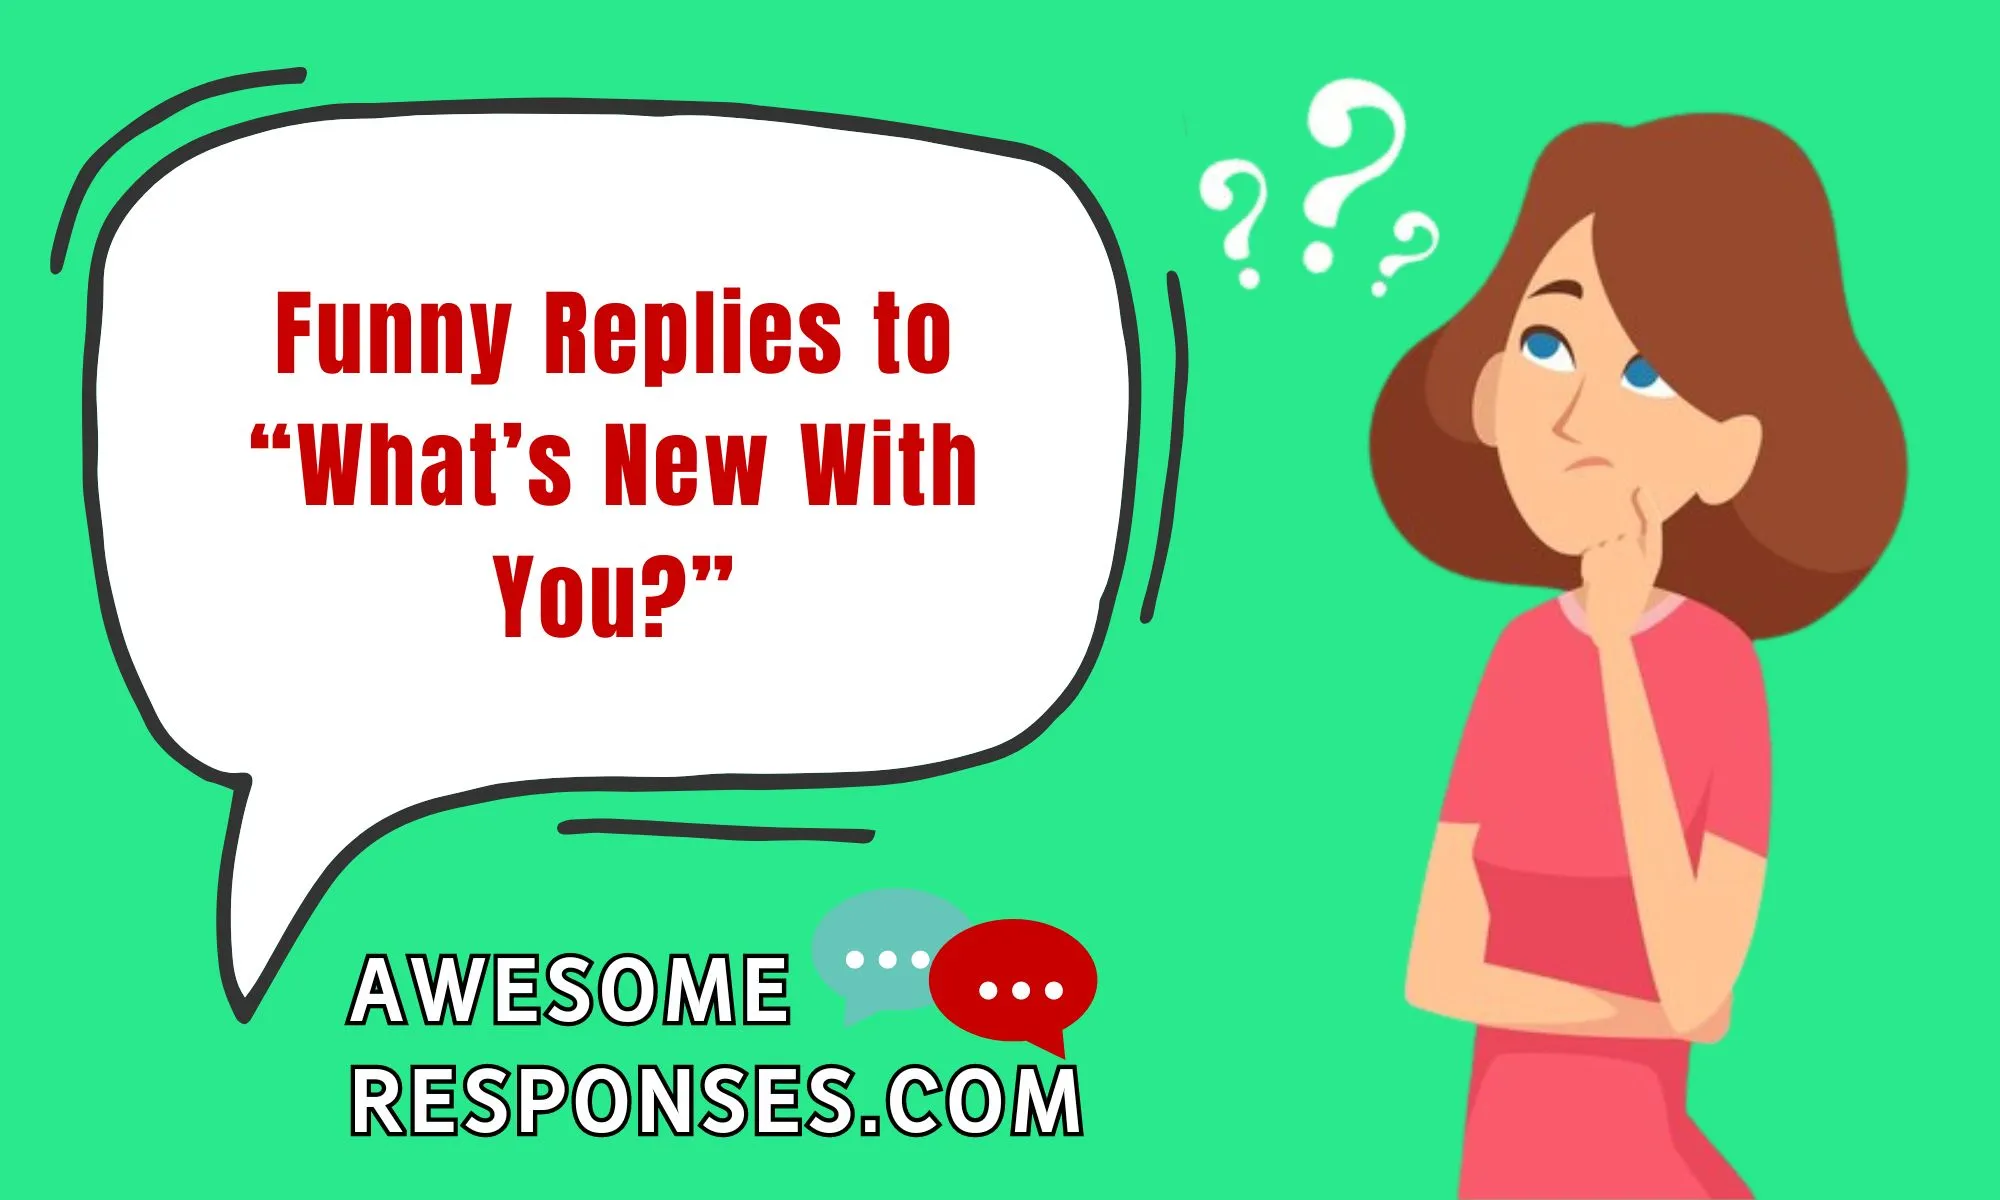 Funny Replies to “What’s New With You?”